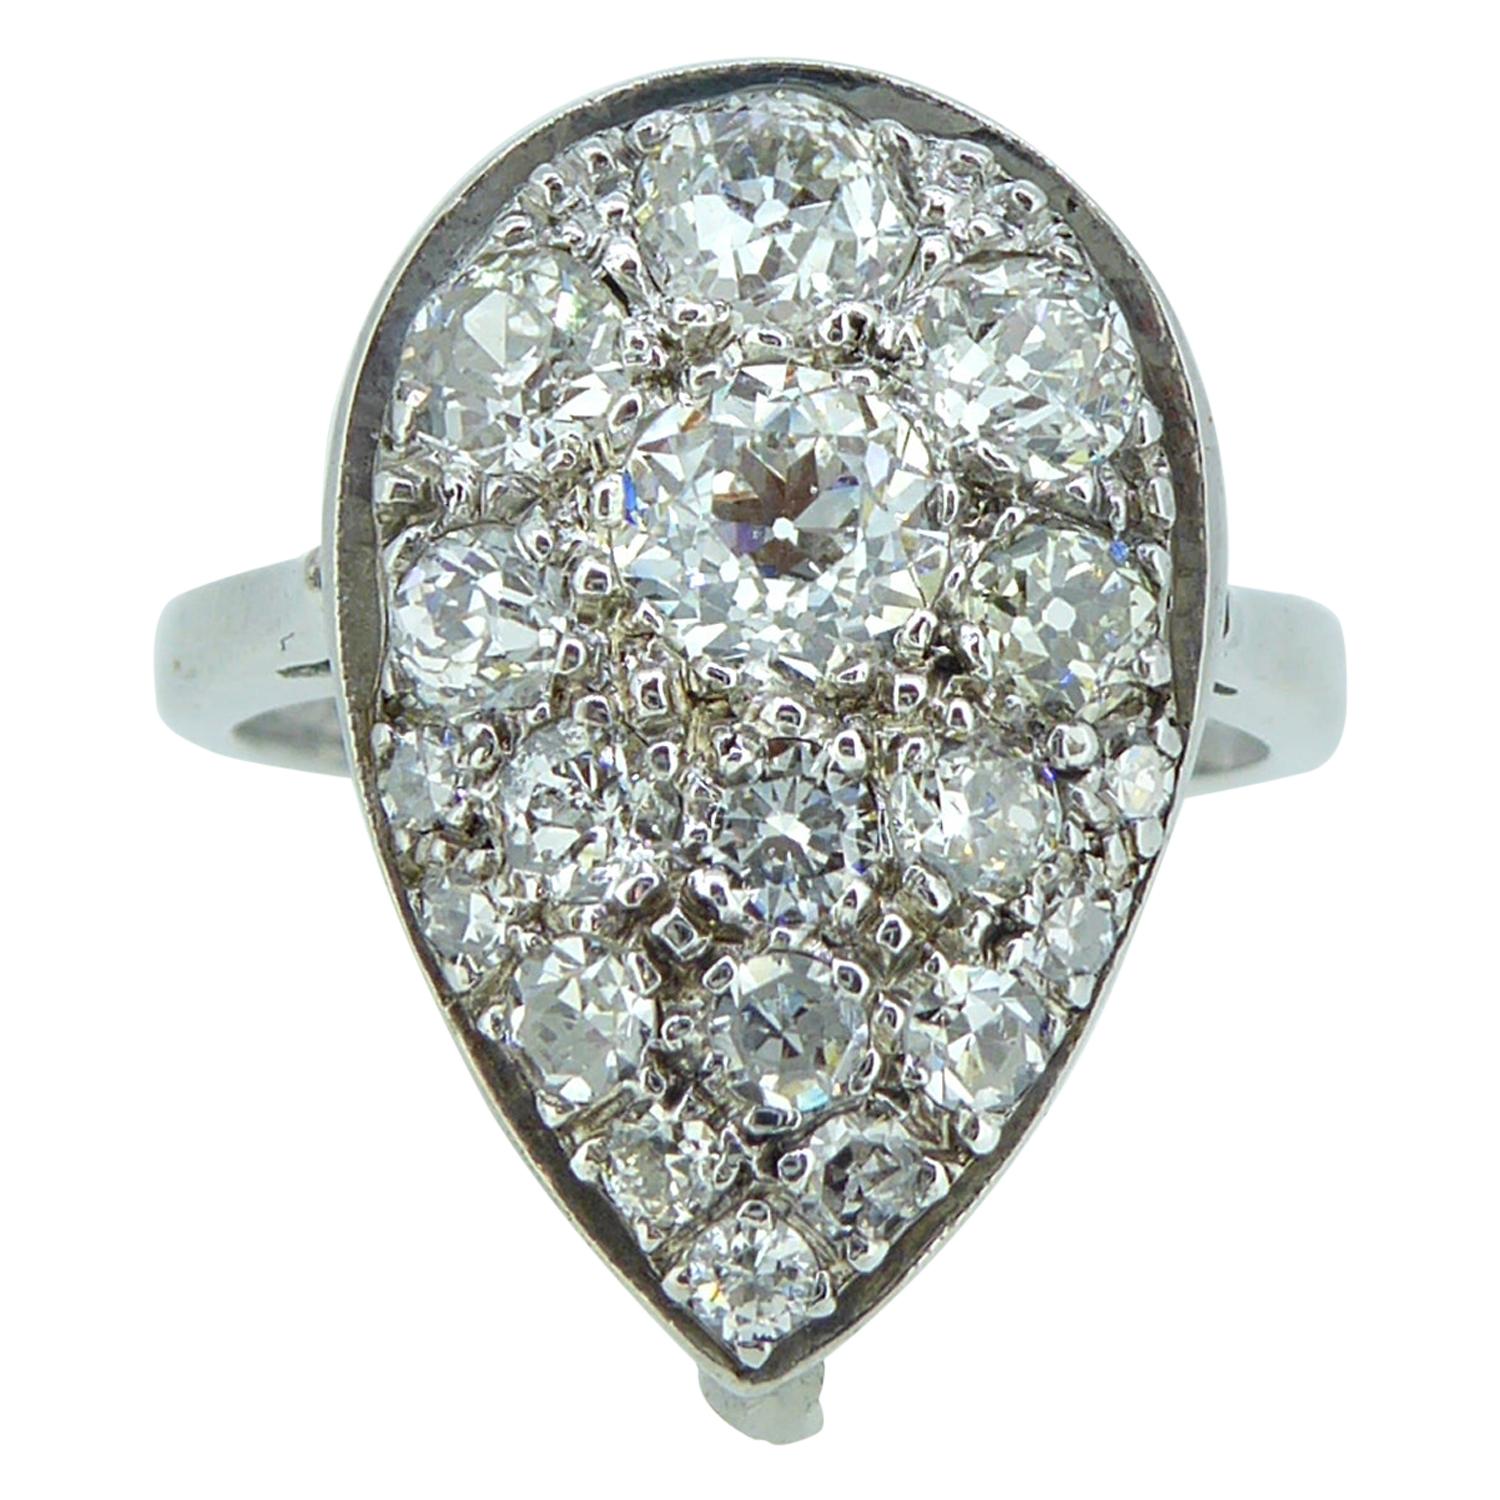 1.53 Carat Pear Shaped Diamond Ring, Cluster Style, White Gold